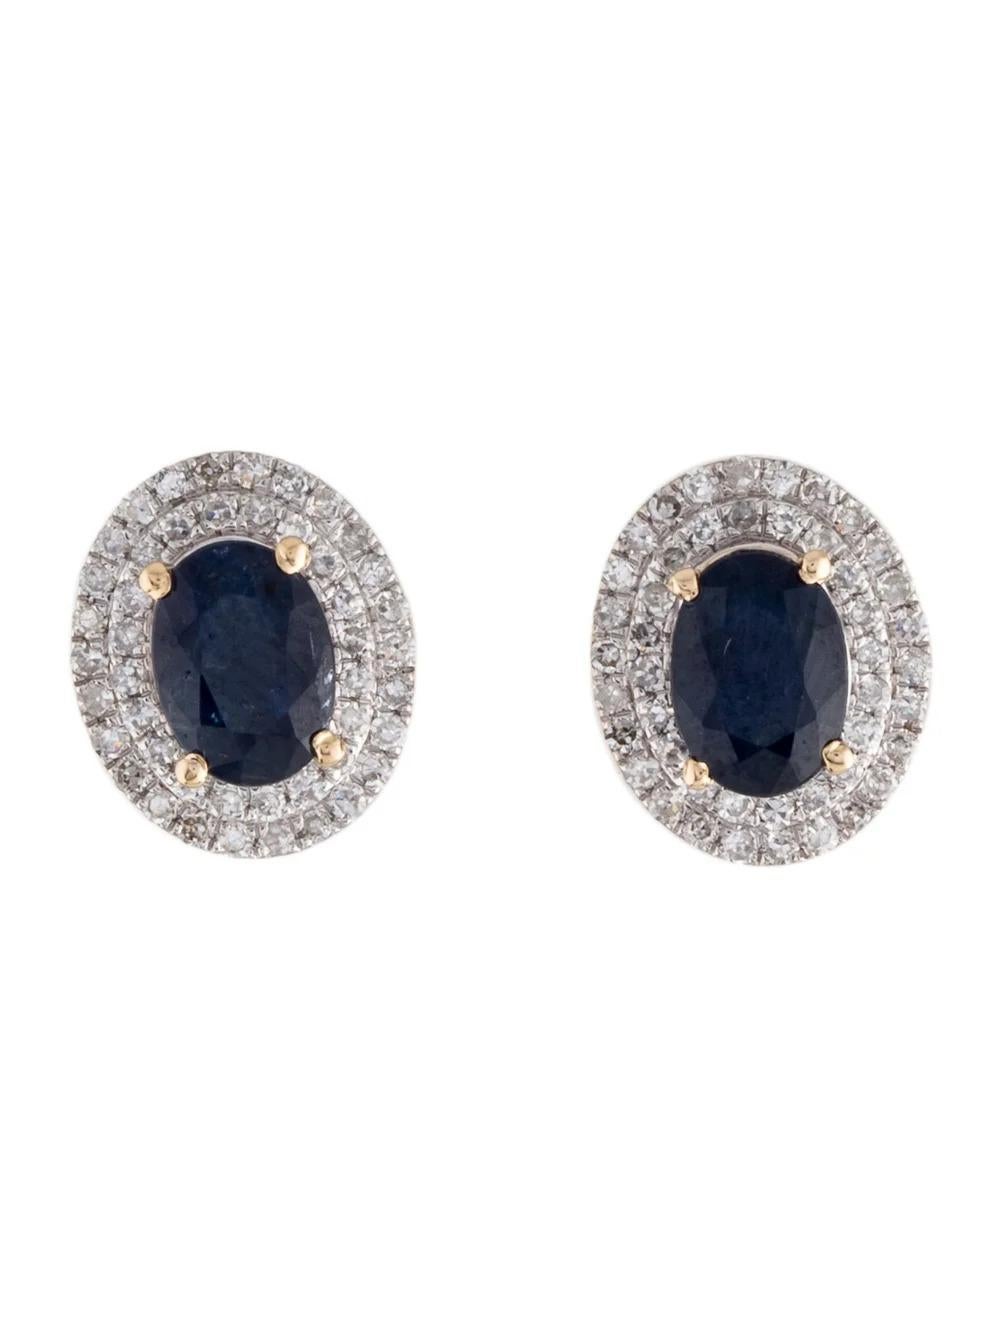 Discover elegance with these stunning 14K Yellow Gold Sapphire and Diamond Stud Earrings. Crafted to perfection, these earrings feature exquisite gemstones set in a timeless design.

Specifications:

* Material: 14K Yellow Gold
* Gemstone: